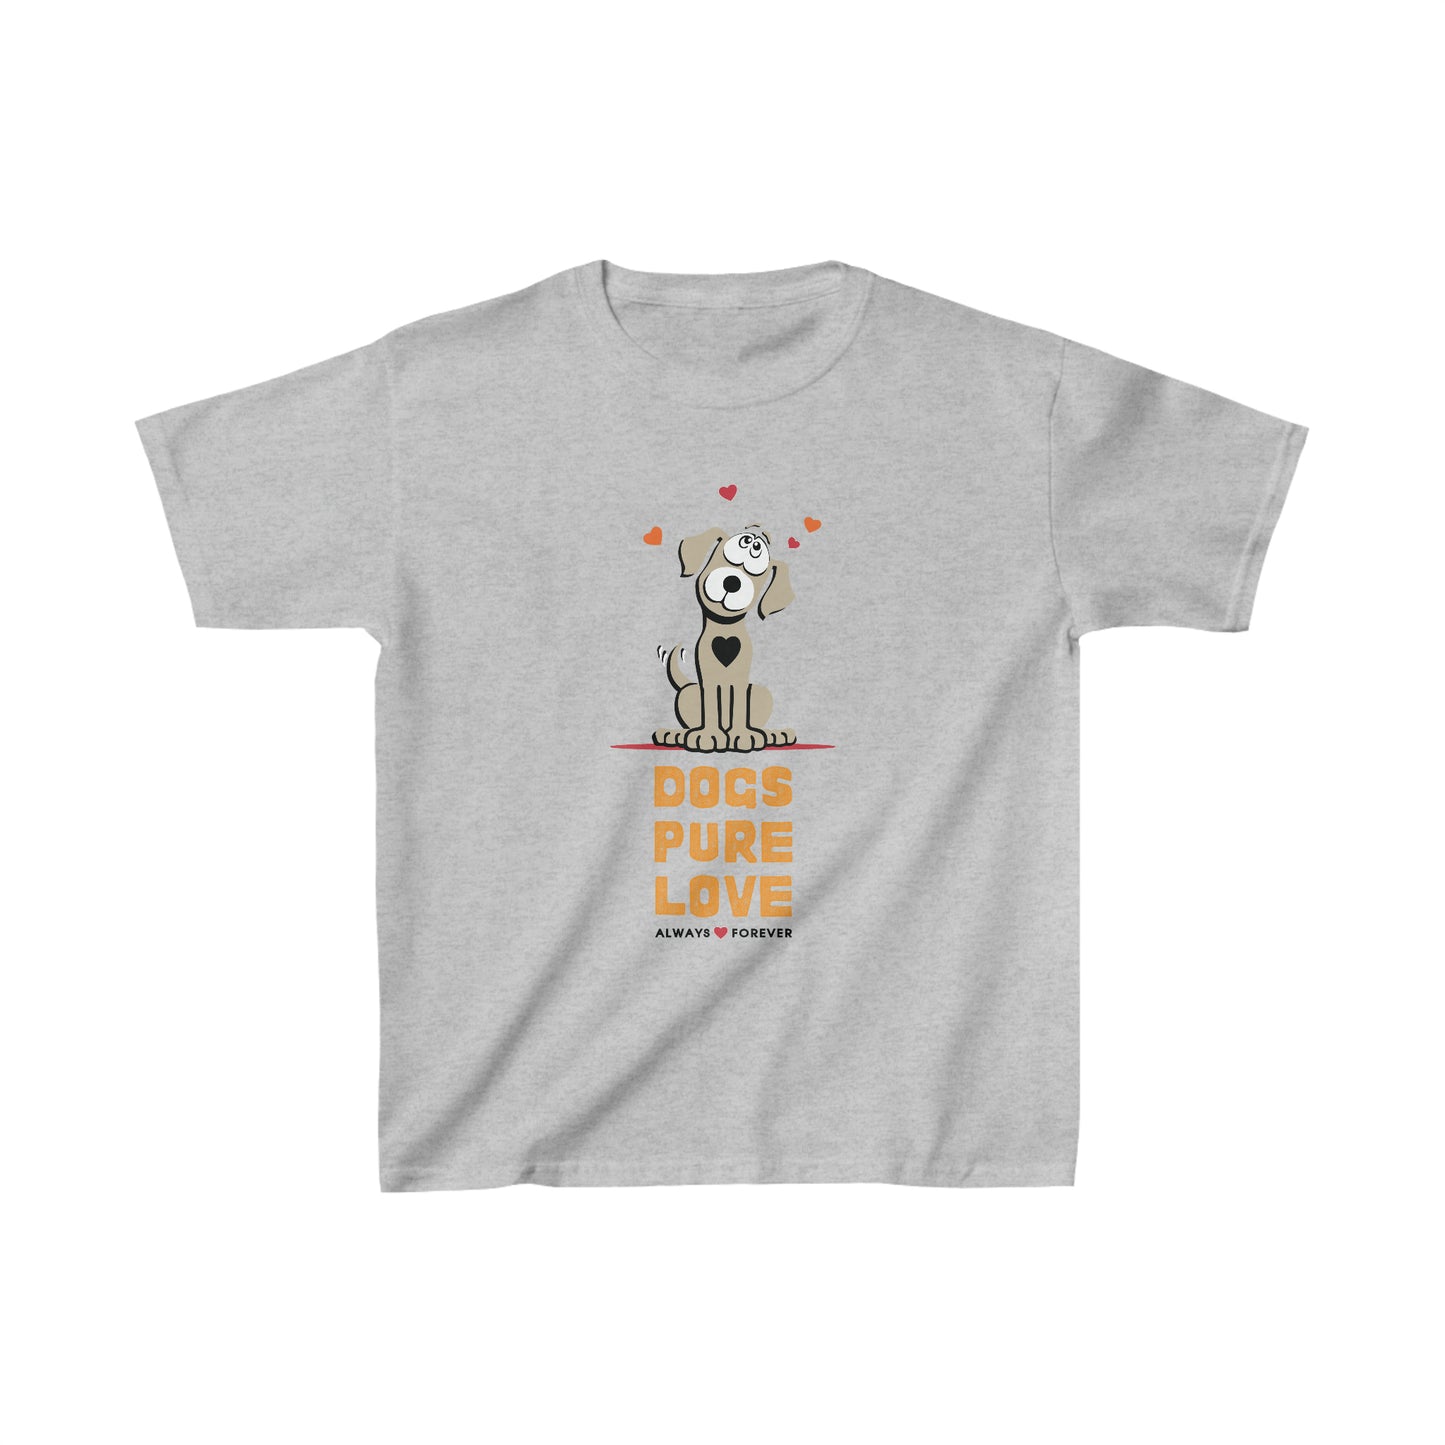 A sport grey unisex kids t-shirt features the Dogs Pure Love logo, set against a white backdrop.